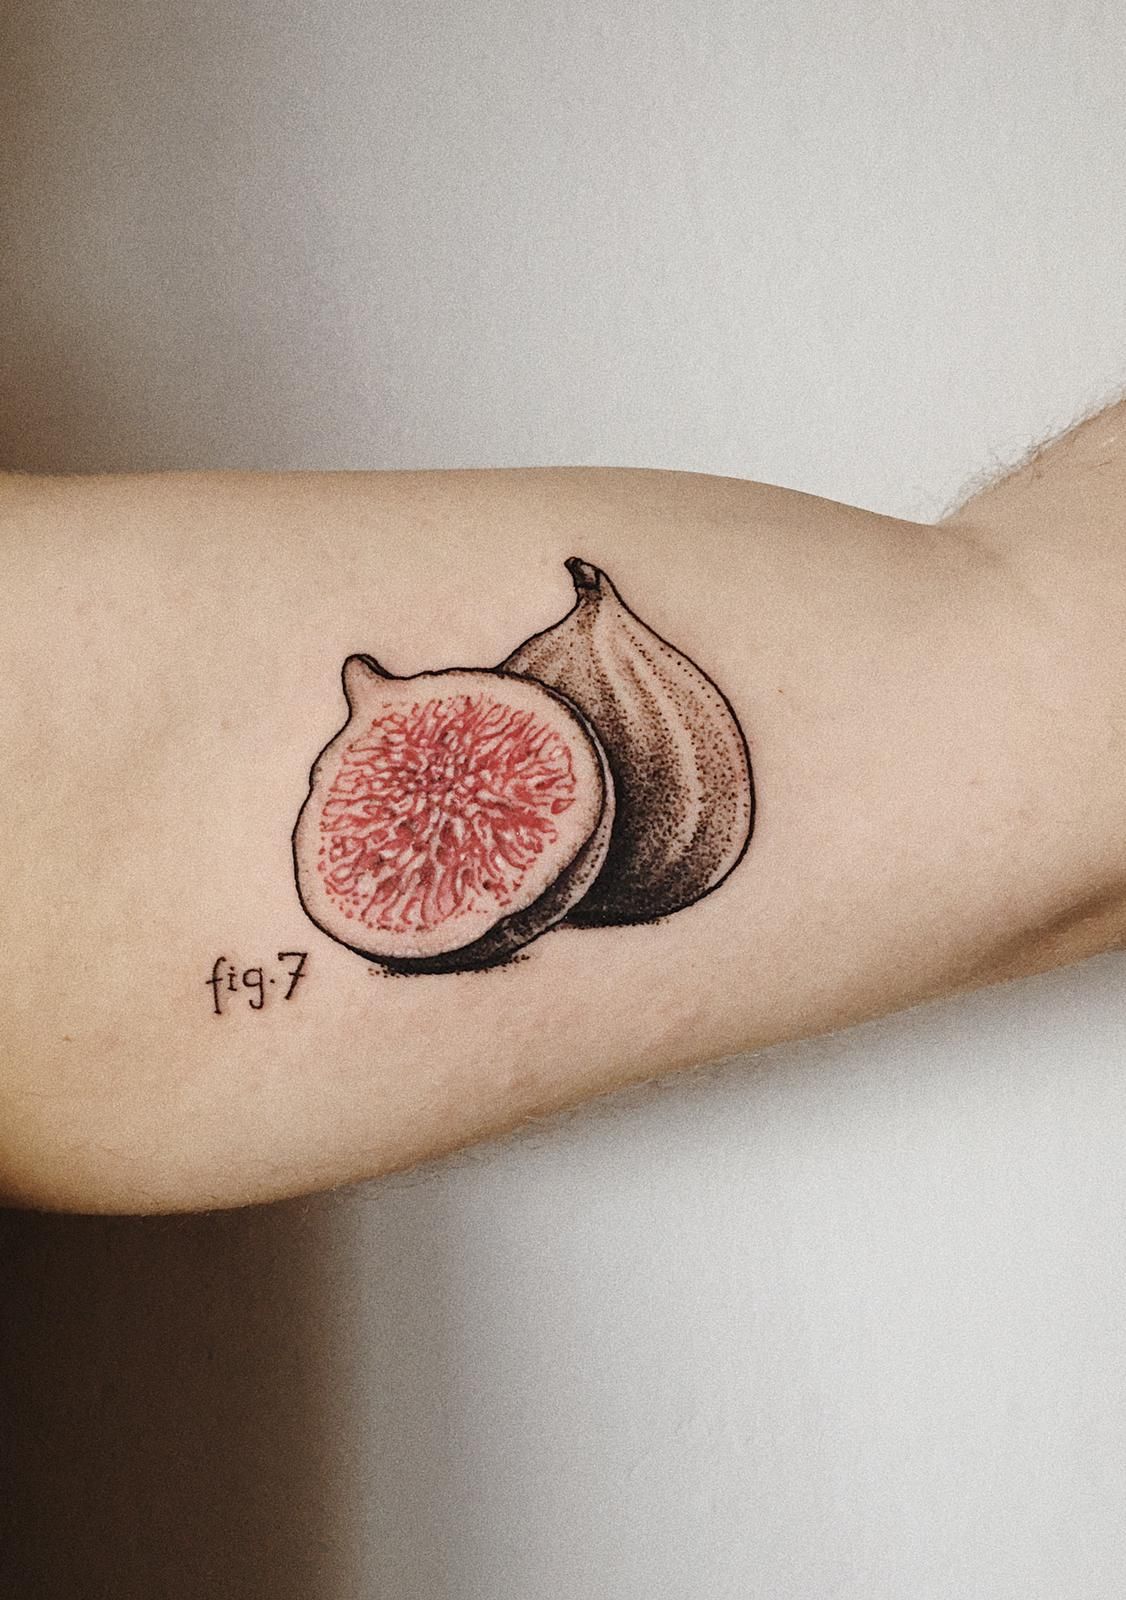 fig tree for bailey's first tattoo 🥹 thank you for trusting me! . . . . .  . . . . . . . . . #finelinetattoo #tinytattoo #daintytatt... | Instagram